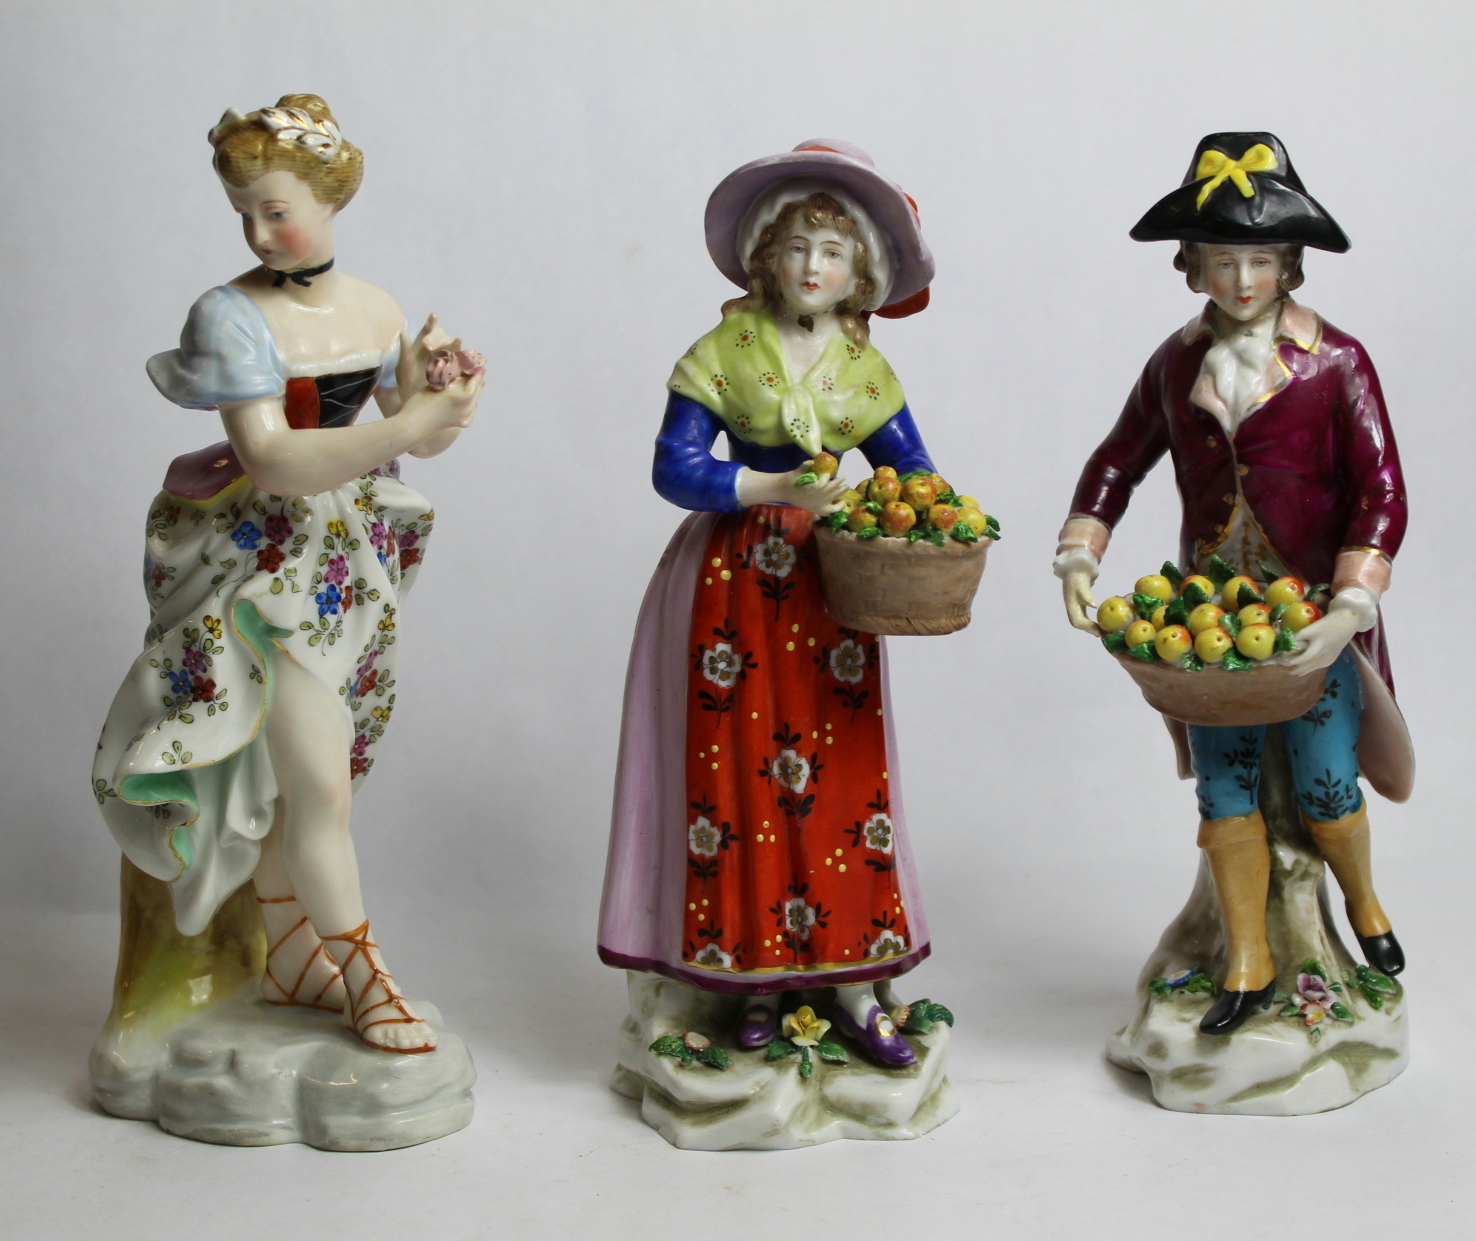 Two continental porcelain figures of fruit sellers, each holding a basket of apples, each 21cm